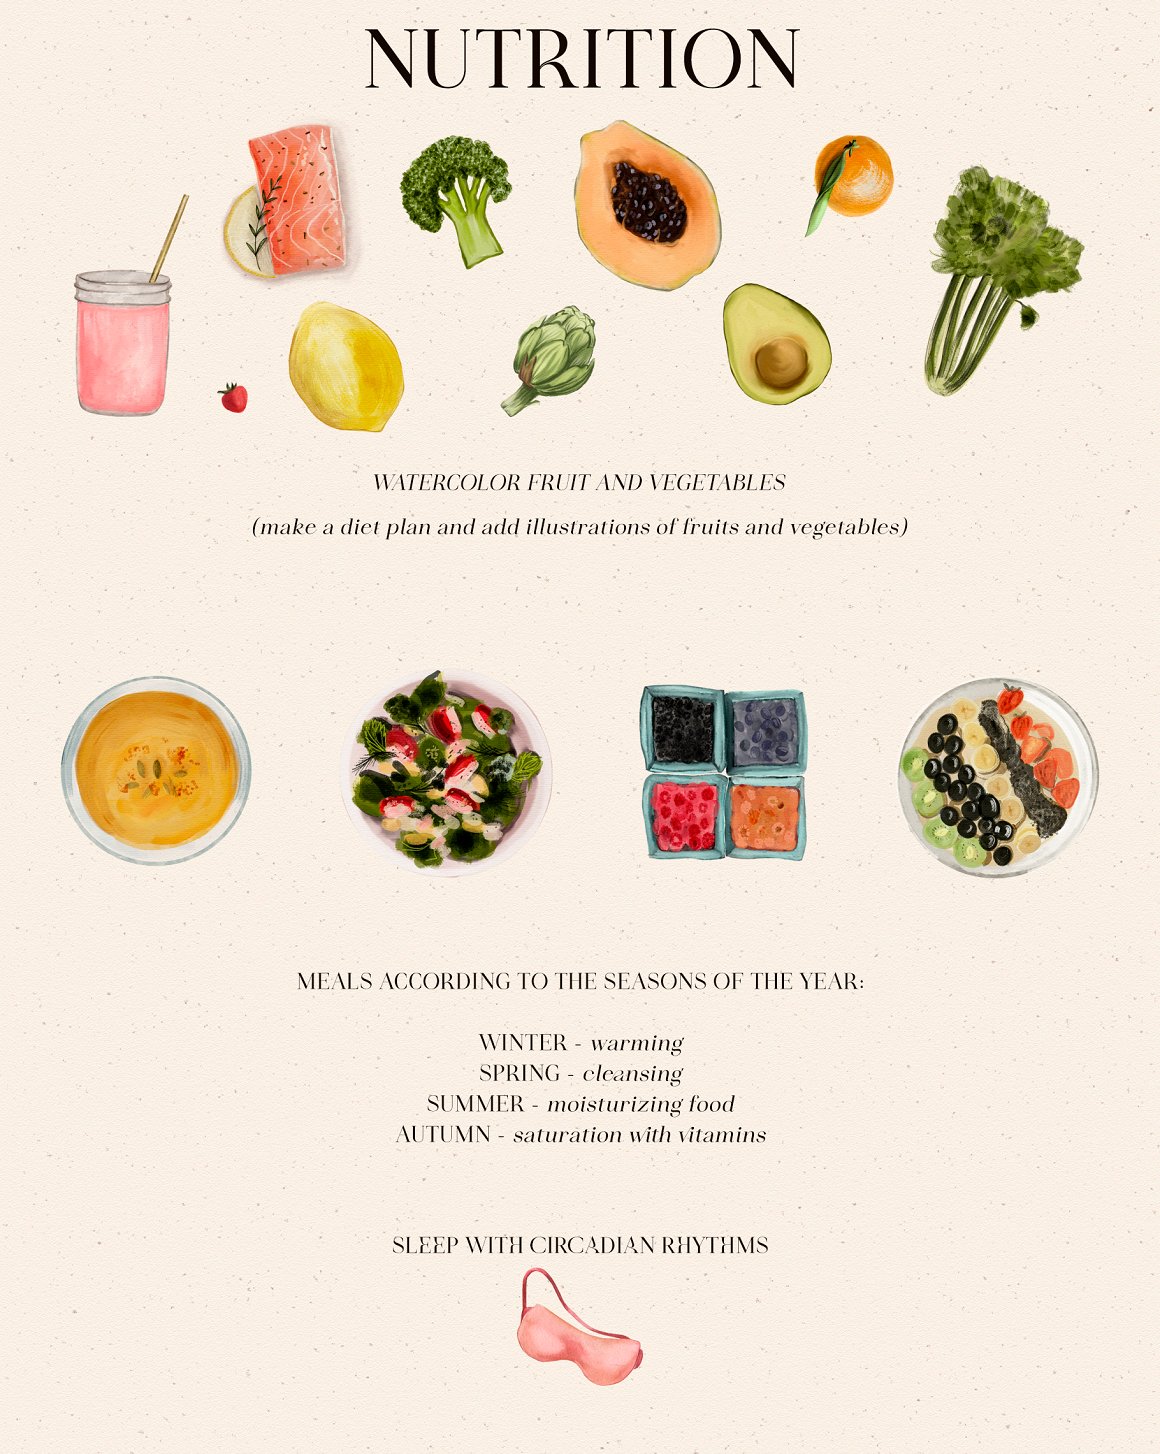 Black lettering "Nutrition" and different watercolor illustrations of fruits, meals and vegetables.